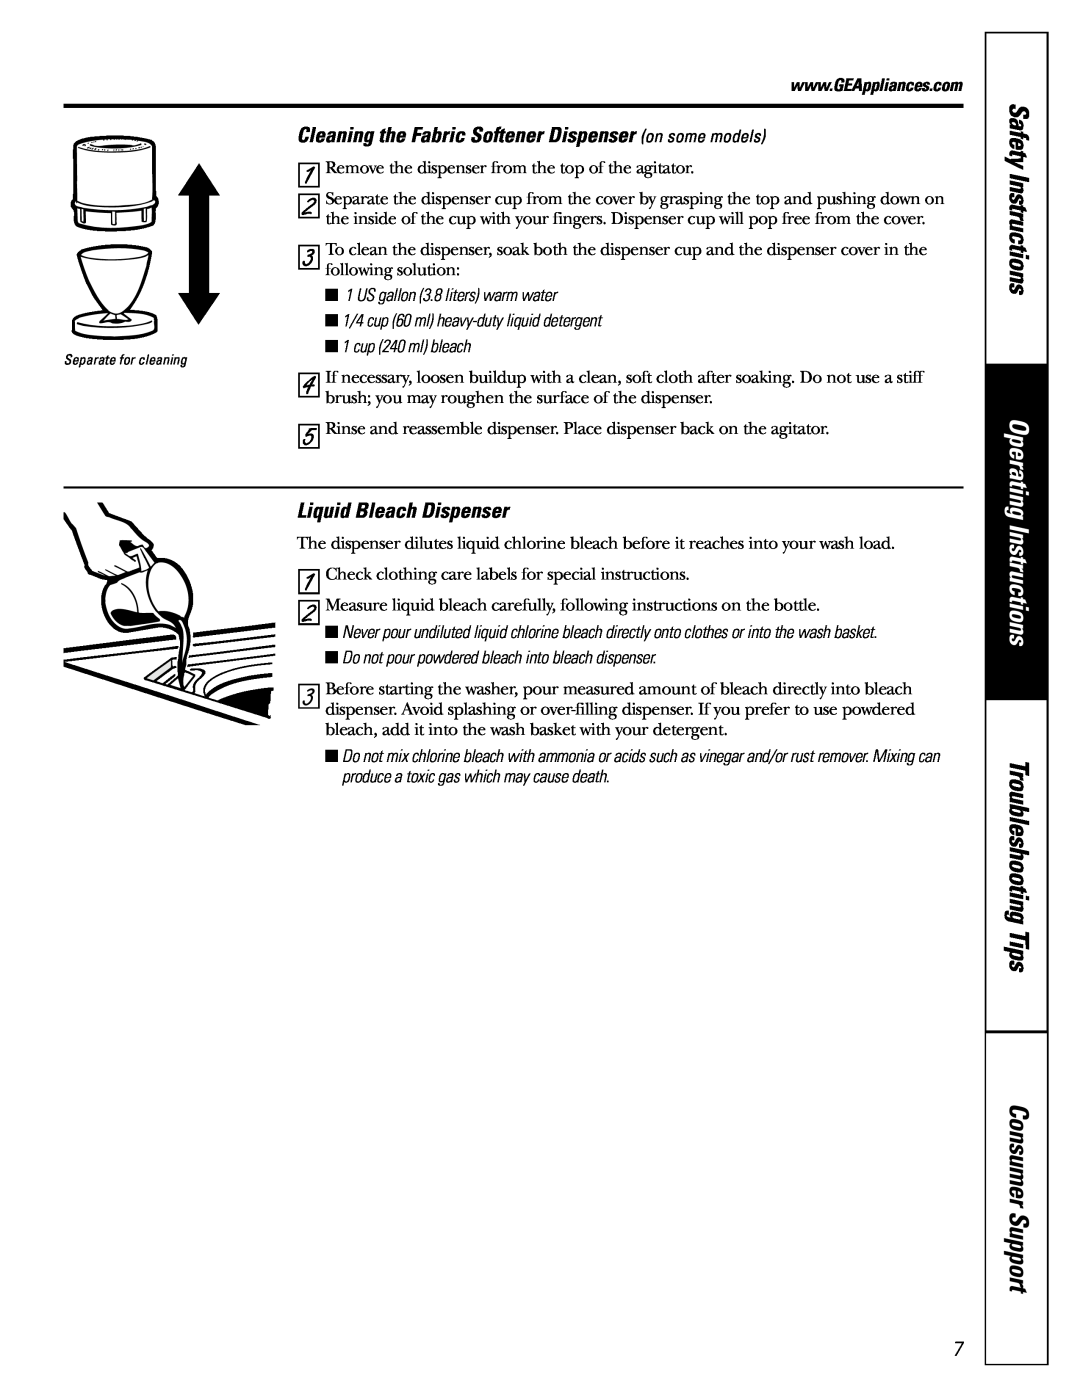 GE WZRE5260, WHRE5260 Troubleshooting Tips Consumer Support, Liquid Bleach Dispenser, 1 2 3, Operating Instructions 